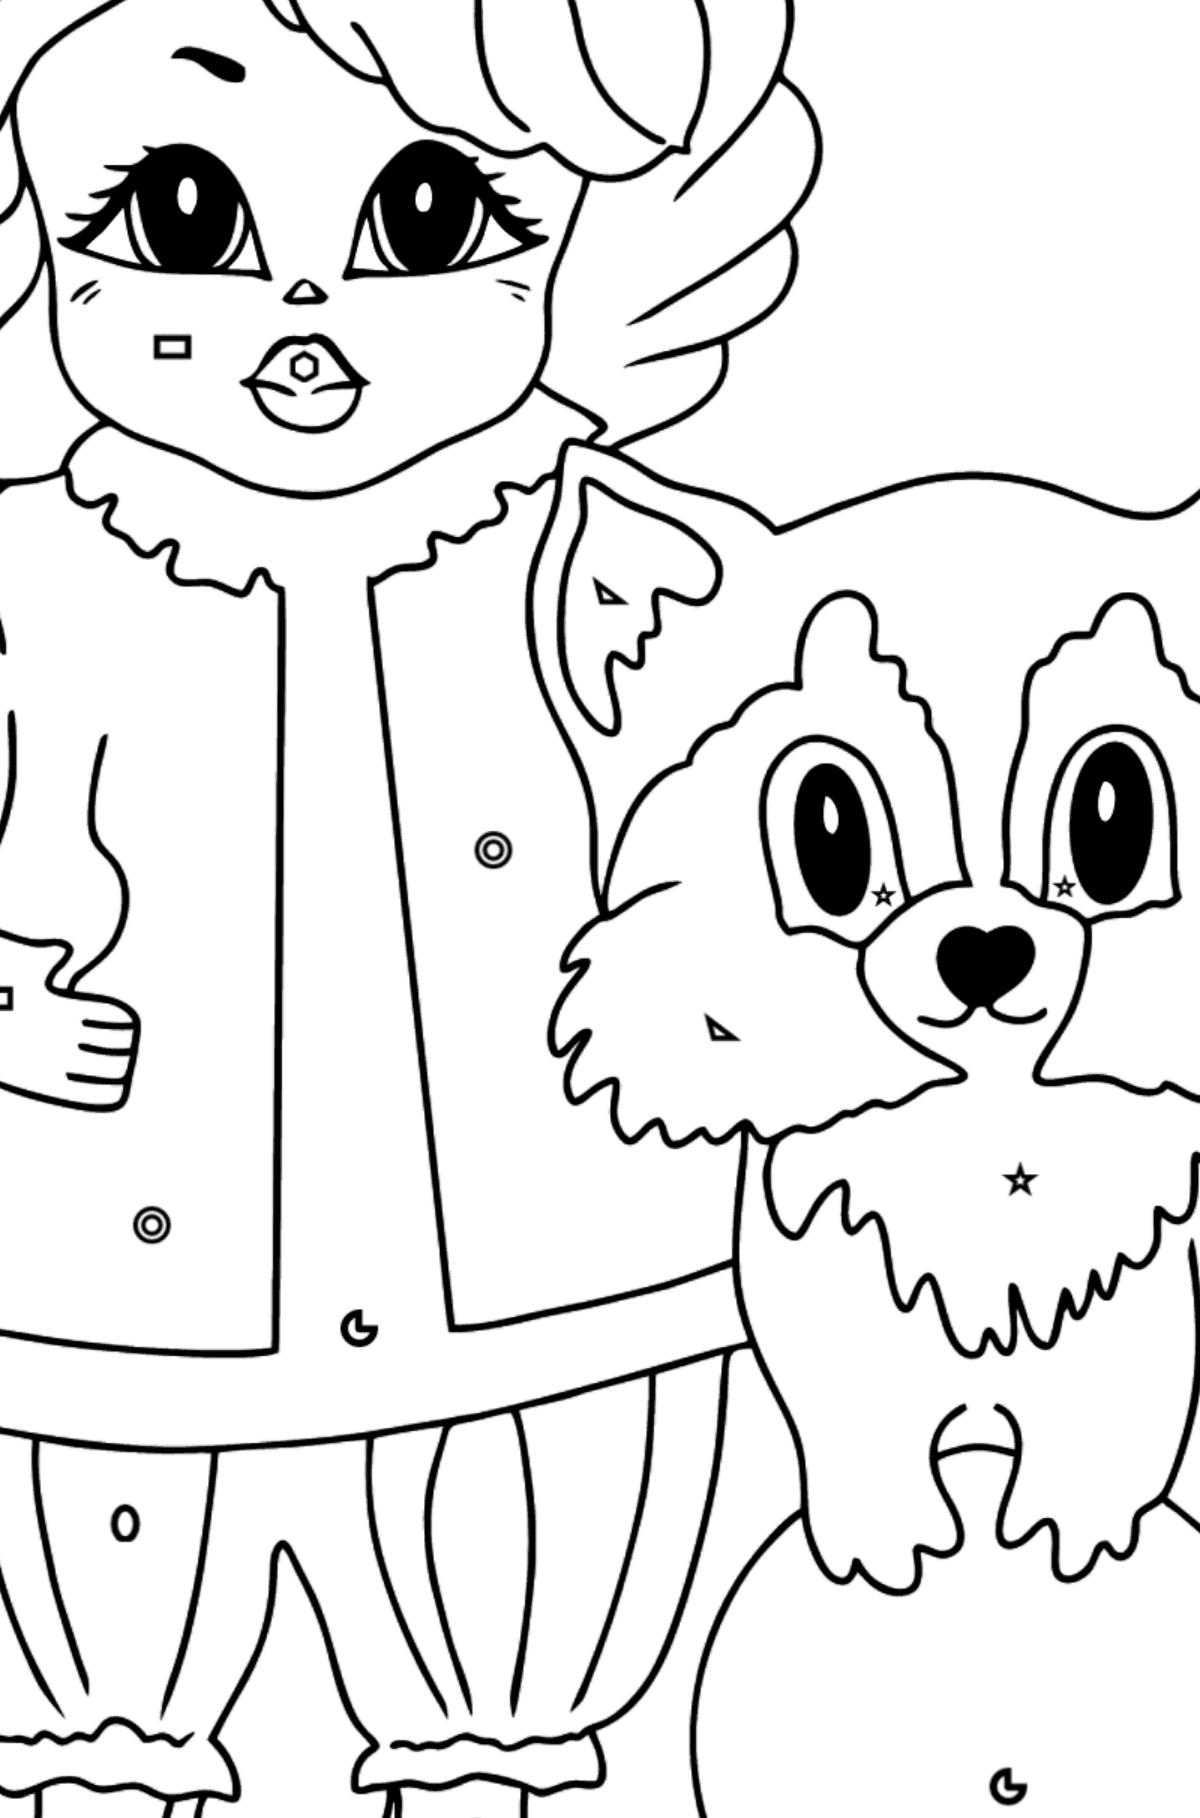 Coloring Picture - A Princess with a Cat and a Racoon - Coloring by Geometric Shapes for Kids